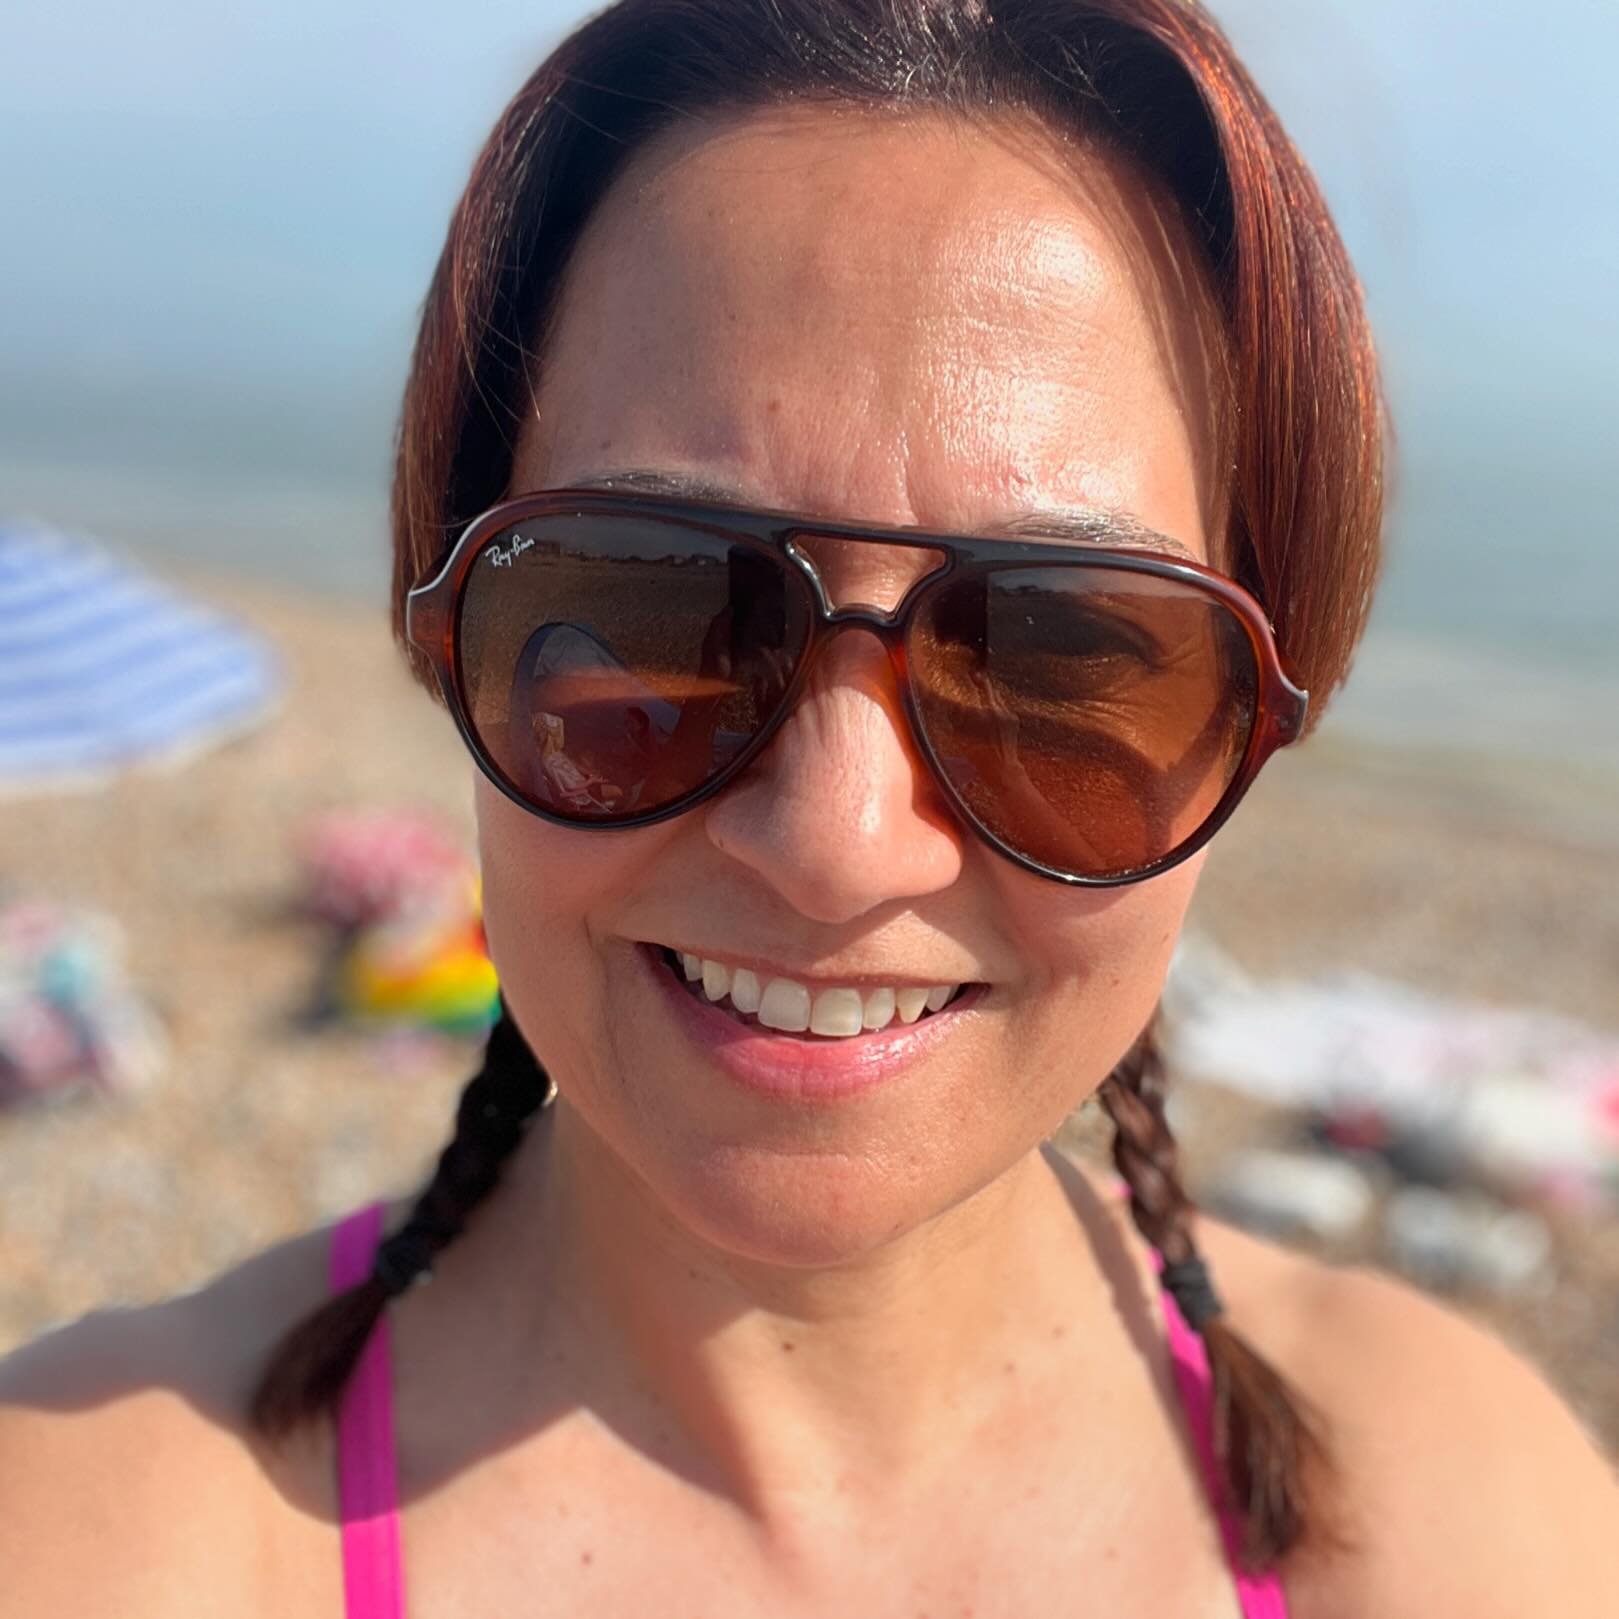 Loving the sunshine! Hope you&rsquo;re enjoying it where you are ☀️

It&rsquo;s Sunday evening - which means I&rsquo;m on @realliferadiouk from 5pm until 8pm - listen in for perfect mix of tunes from the 60s, 70s, 80s, 90s, 00s &amp; now 😊

#sundayv